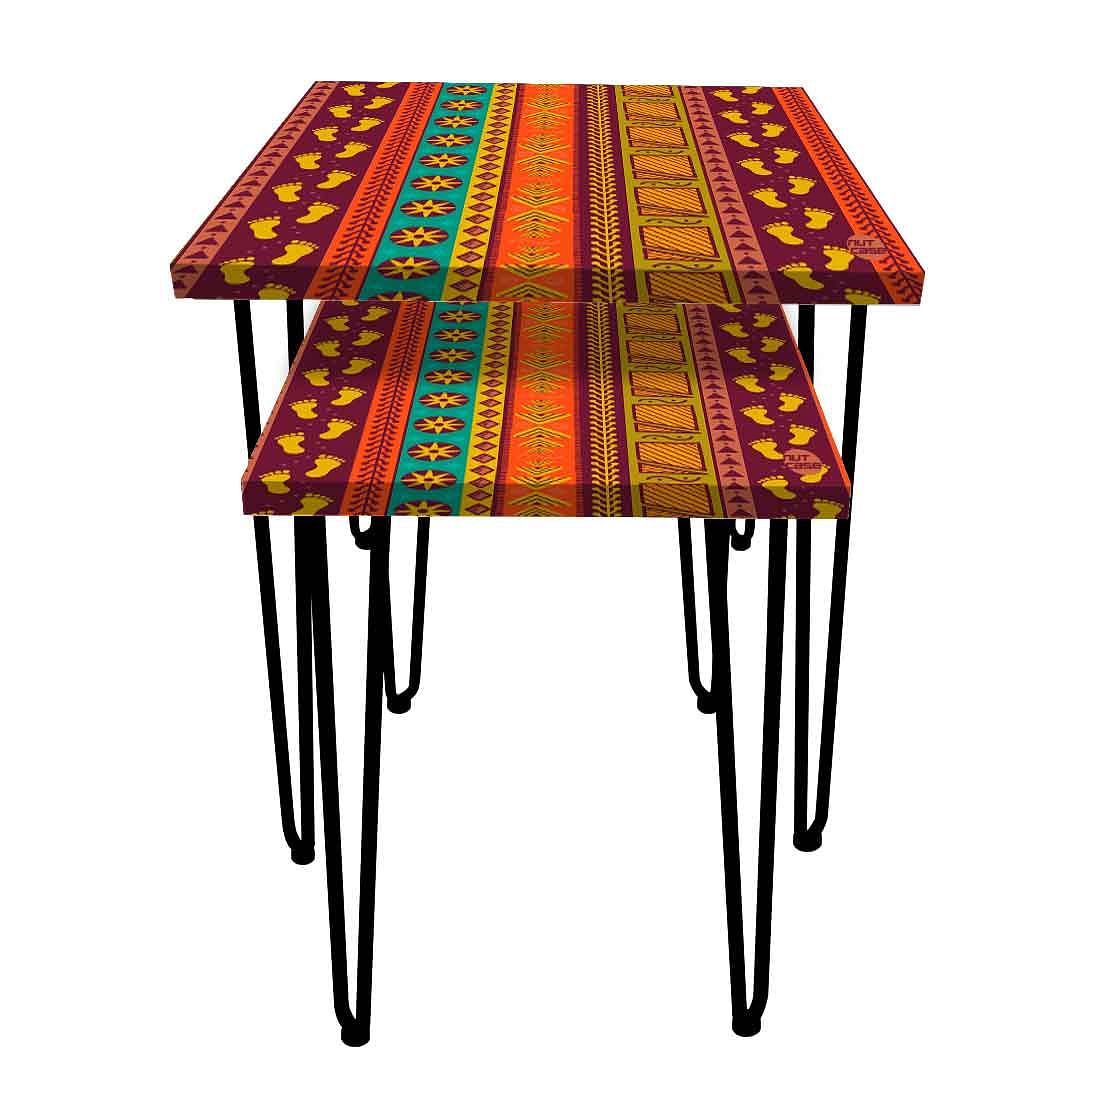 Attractive Stackable Nest of Two Tables for Home and Office - Aztec Orange Green Nutcase